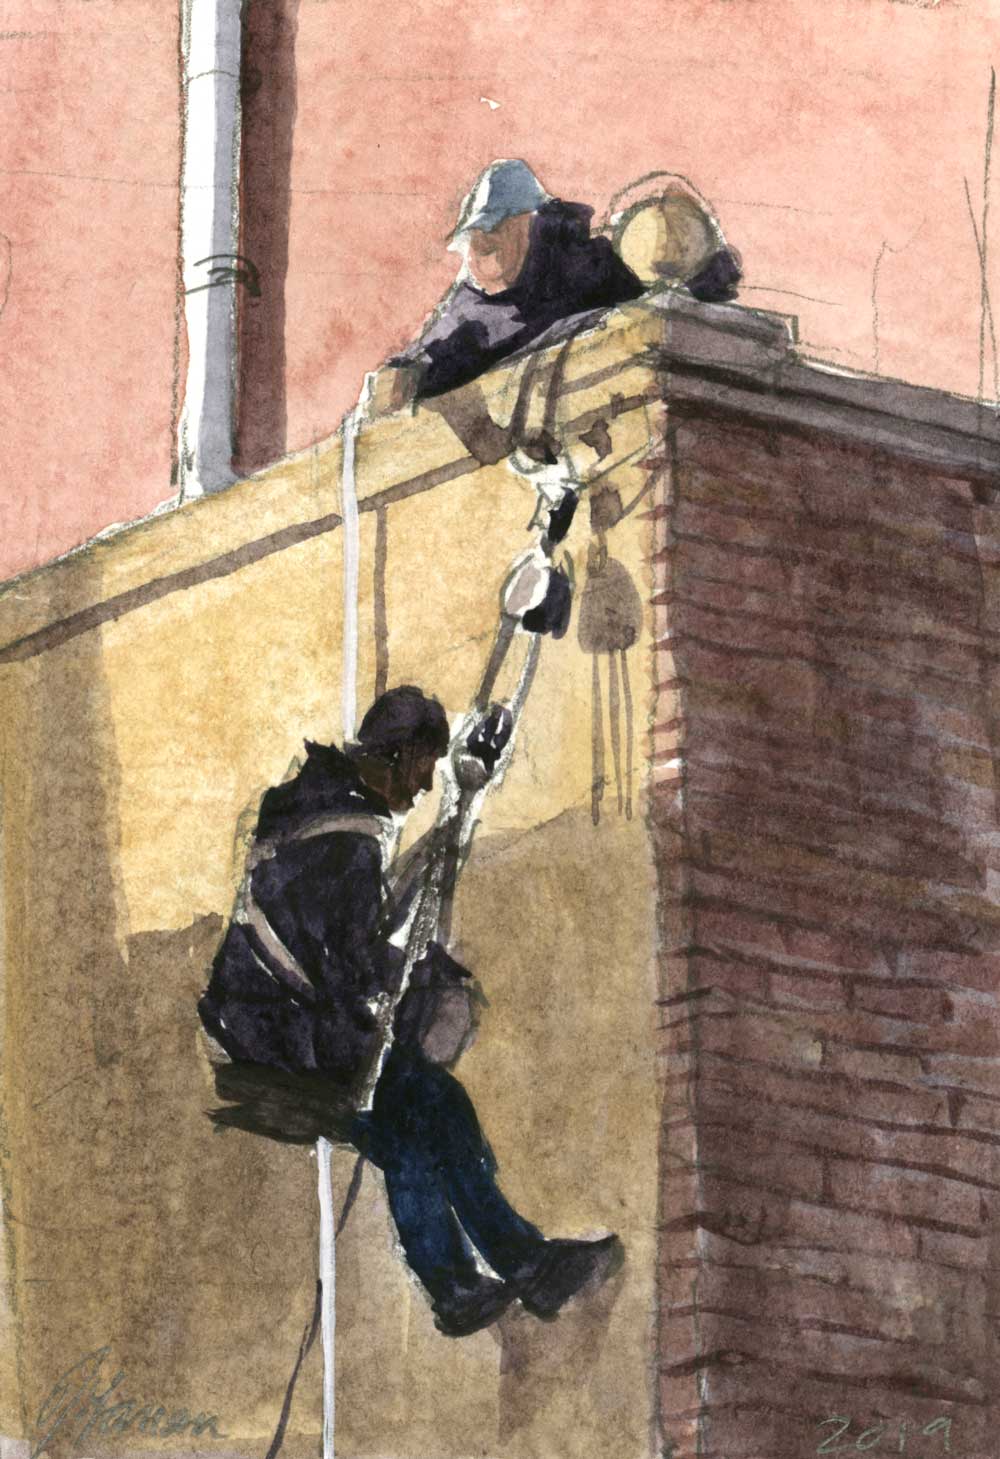 Watercolor sketch of the corner of a brick building. A man with light skind stands on the top and a man with dark skin, suspended by pulleys and ropes, descendes a yellow wall.